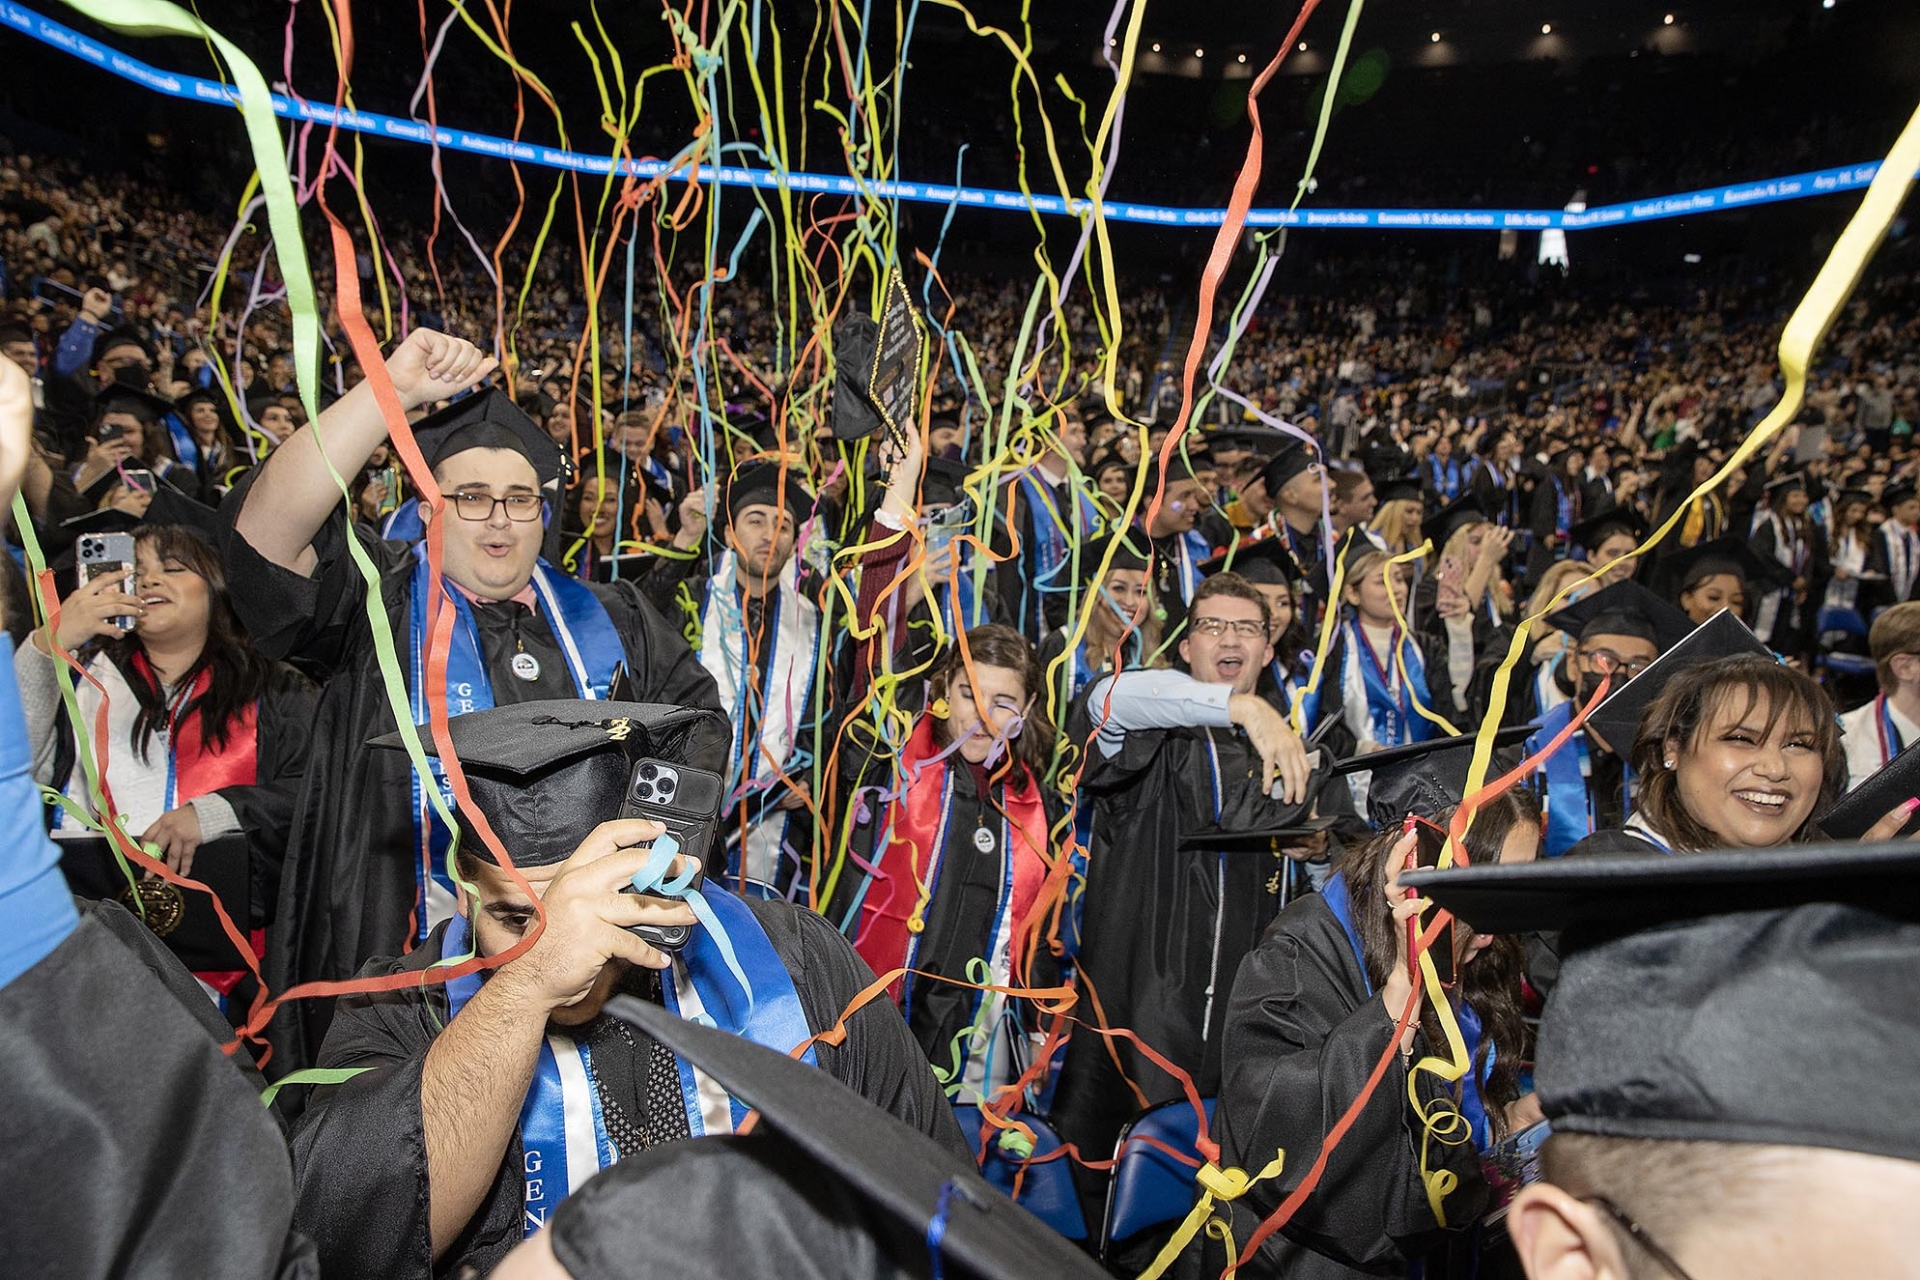 Celebrating at the end of the commencement ceremony as streamers drift down.